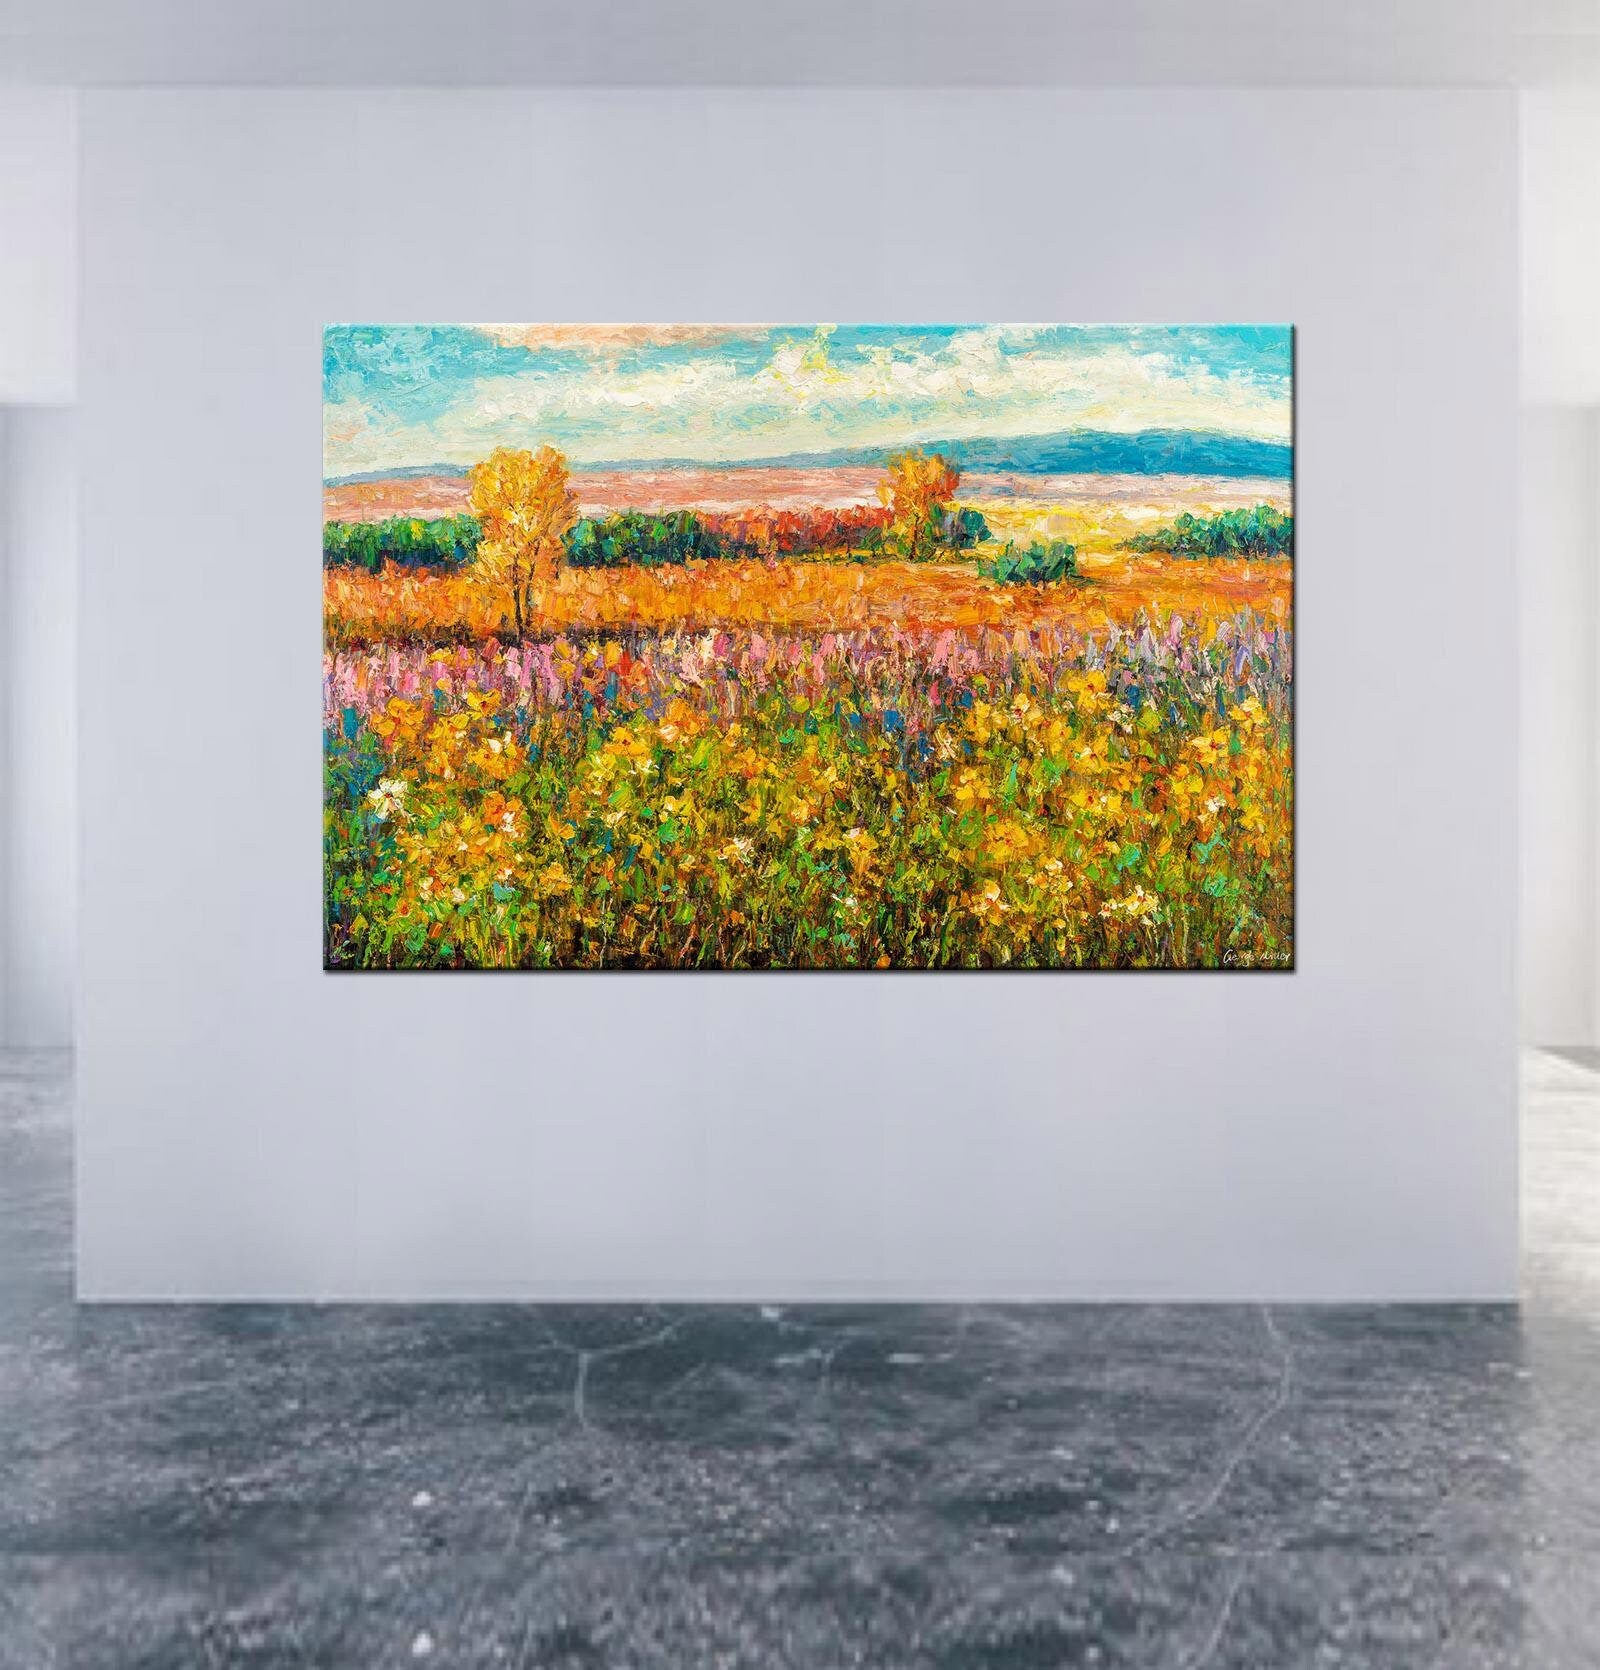 Oil Painting, Landscape Painting, Canvas Art, Landscape Oil Painting, Palette Knife Painting, Large Wall Art, Abstract Landscape Painting